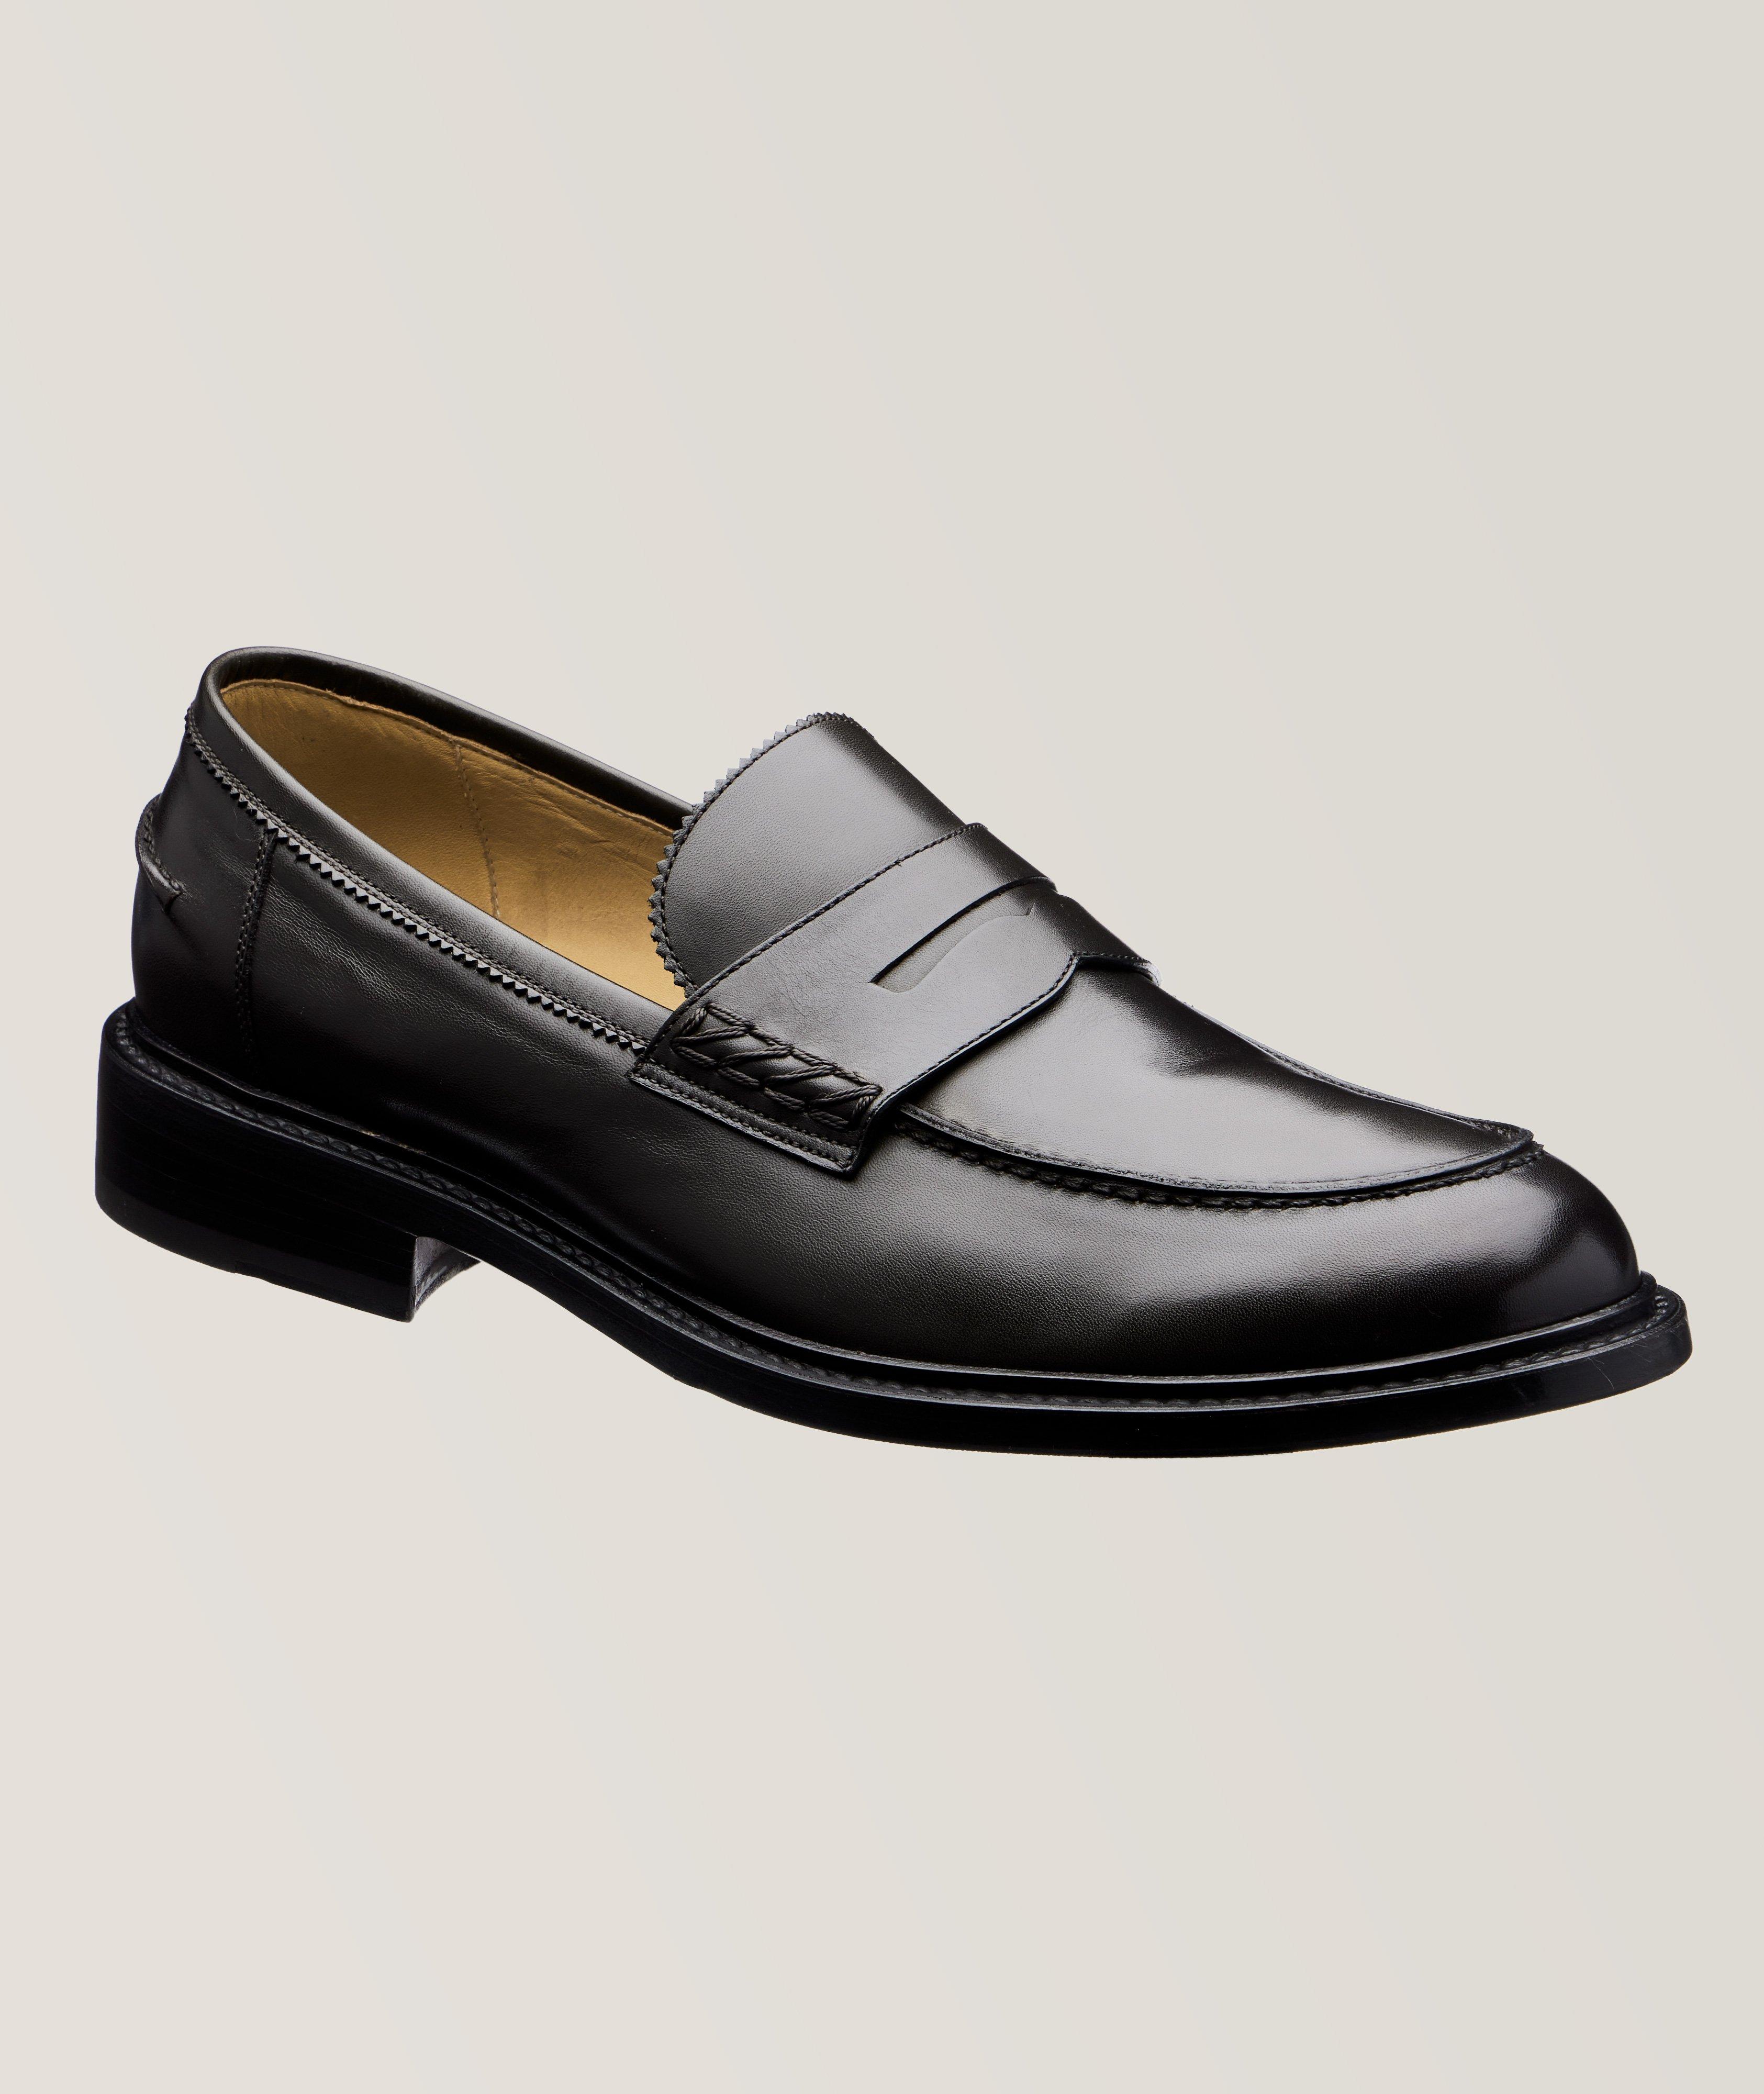 Burnished Leather Penny Loafers image 0